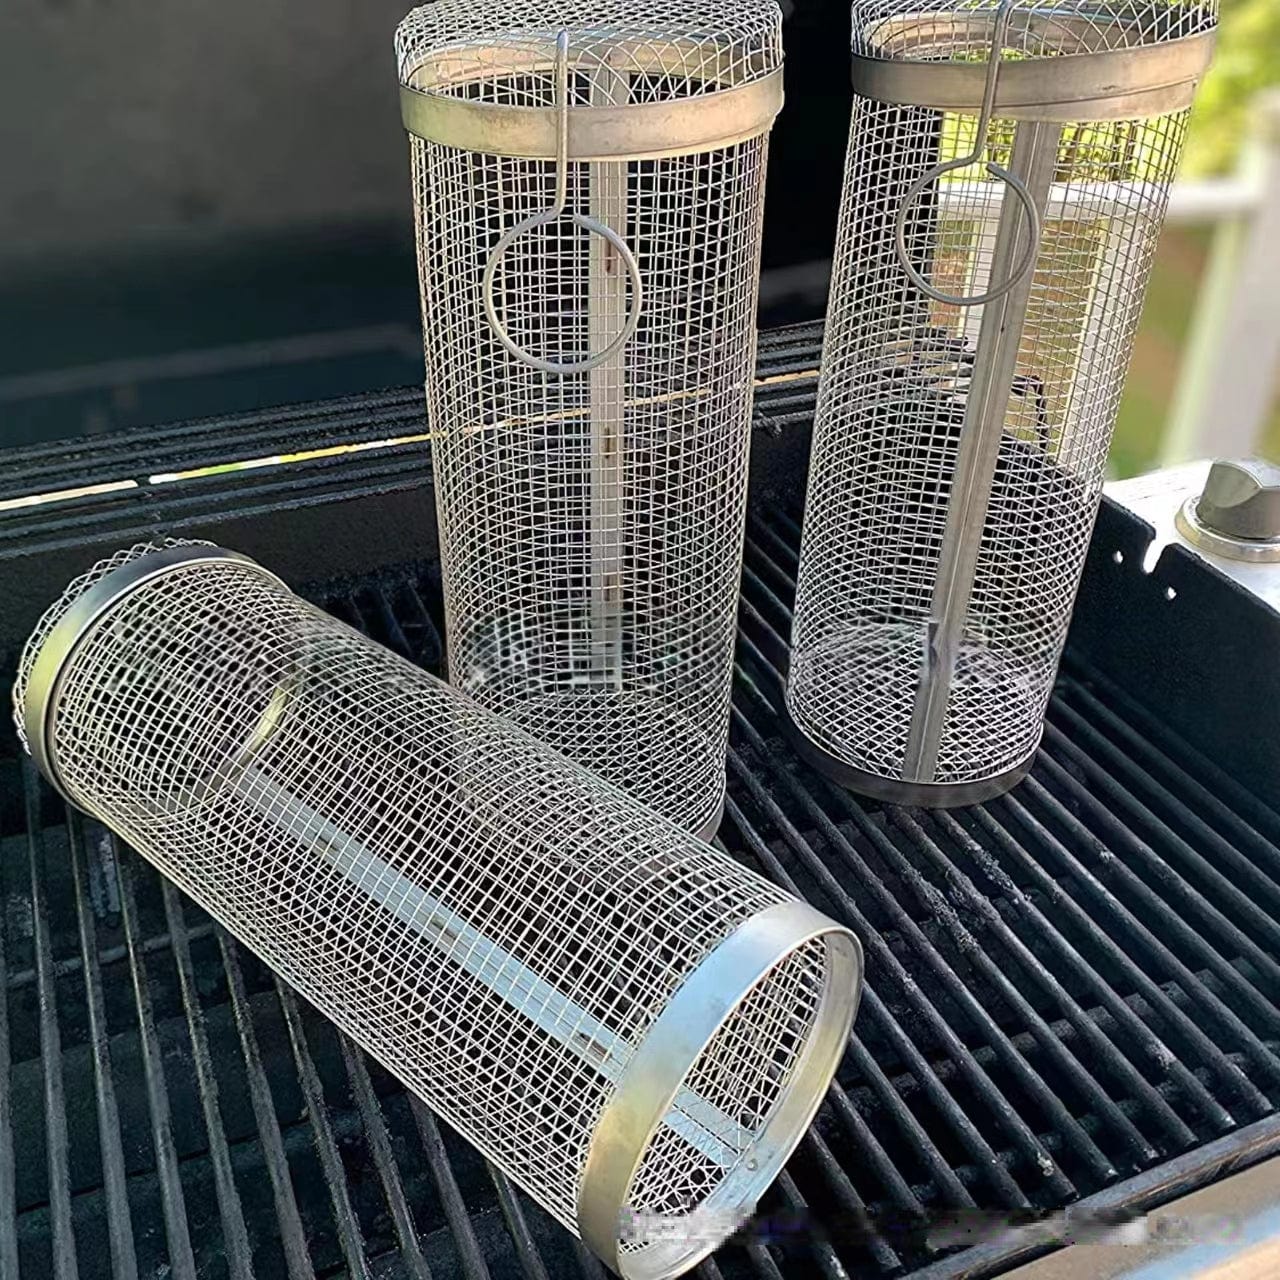 GrillHomie - The ultimate barbecue solution